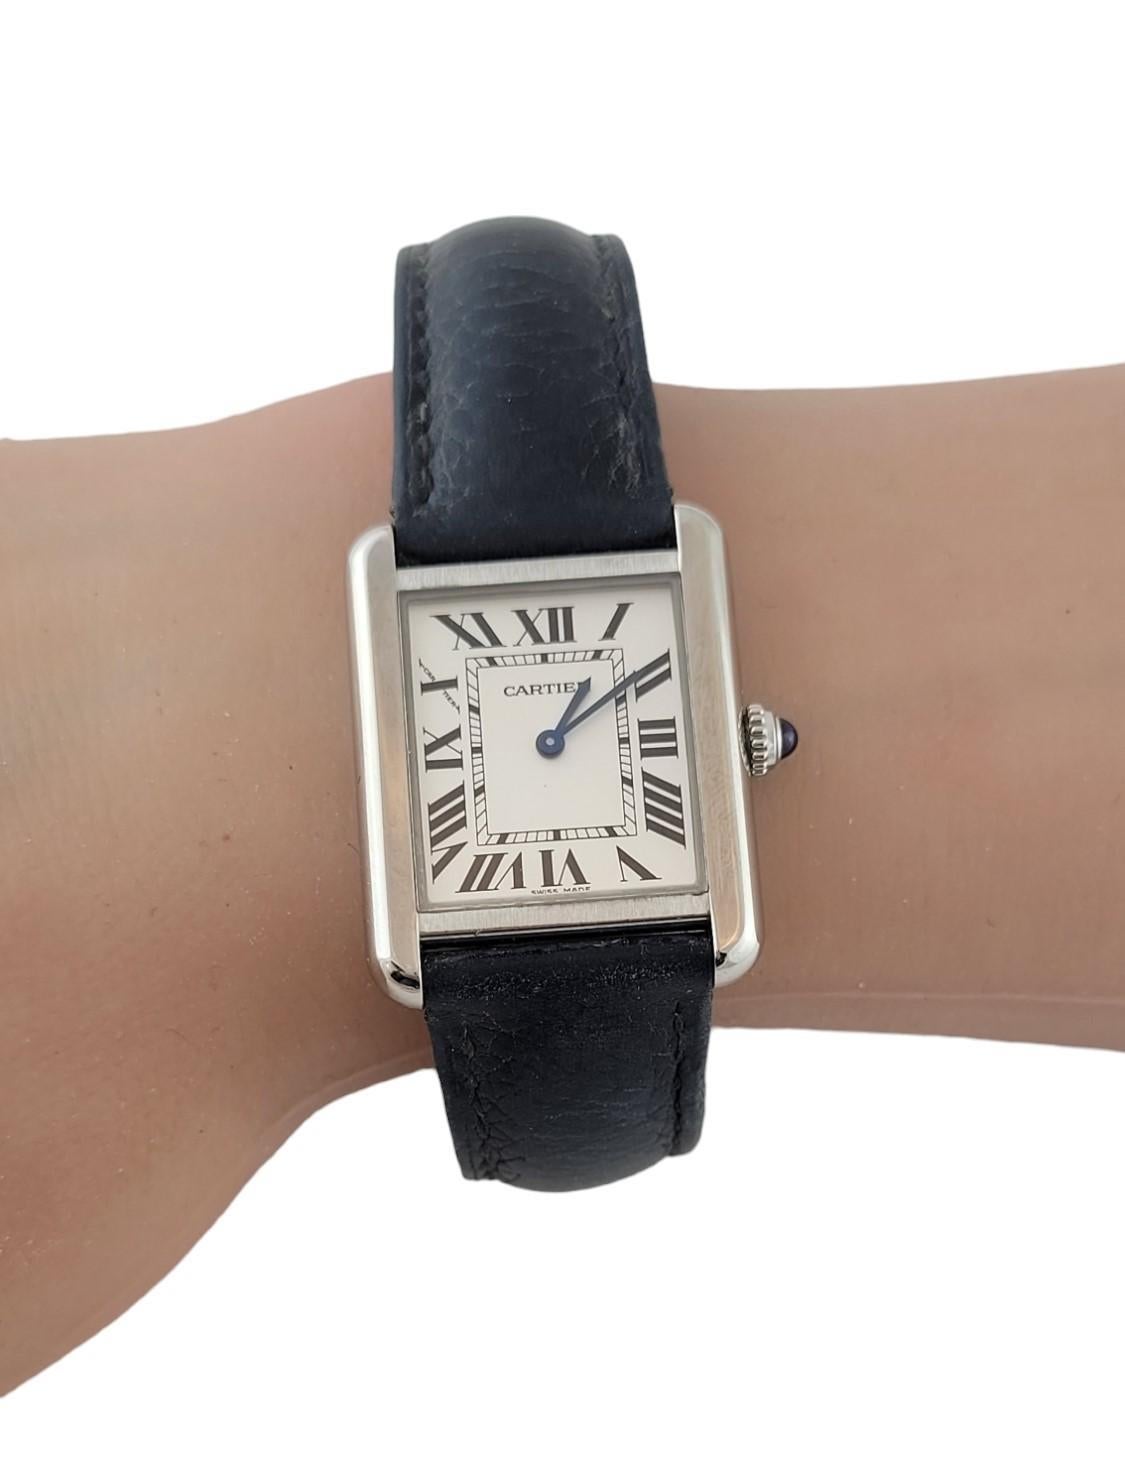 2017 Cartier Tank Solo Ladies Watch 3170 Stainless Quartz Box/Papers #17218 For Sale 7